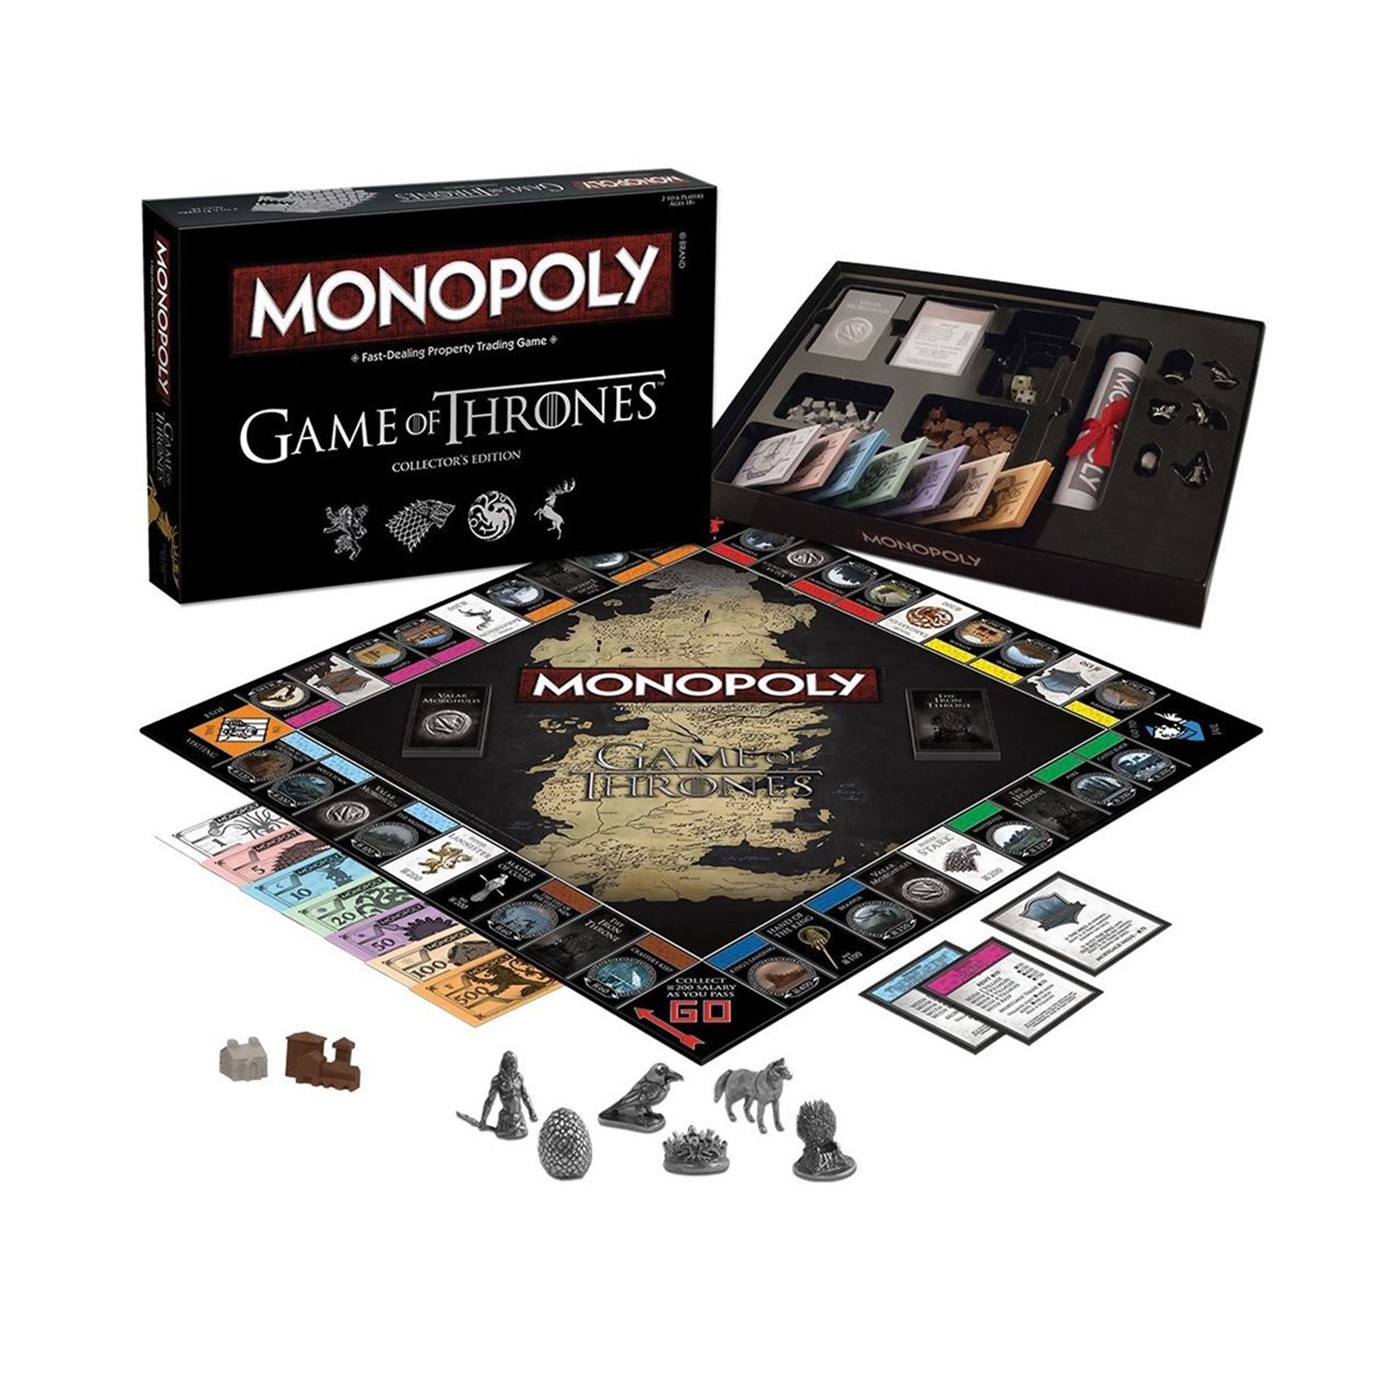 Game of Thrones Collector's Edition Monopoly